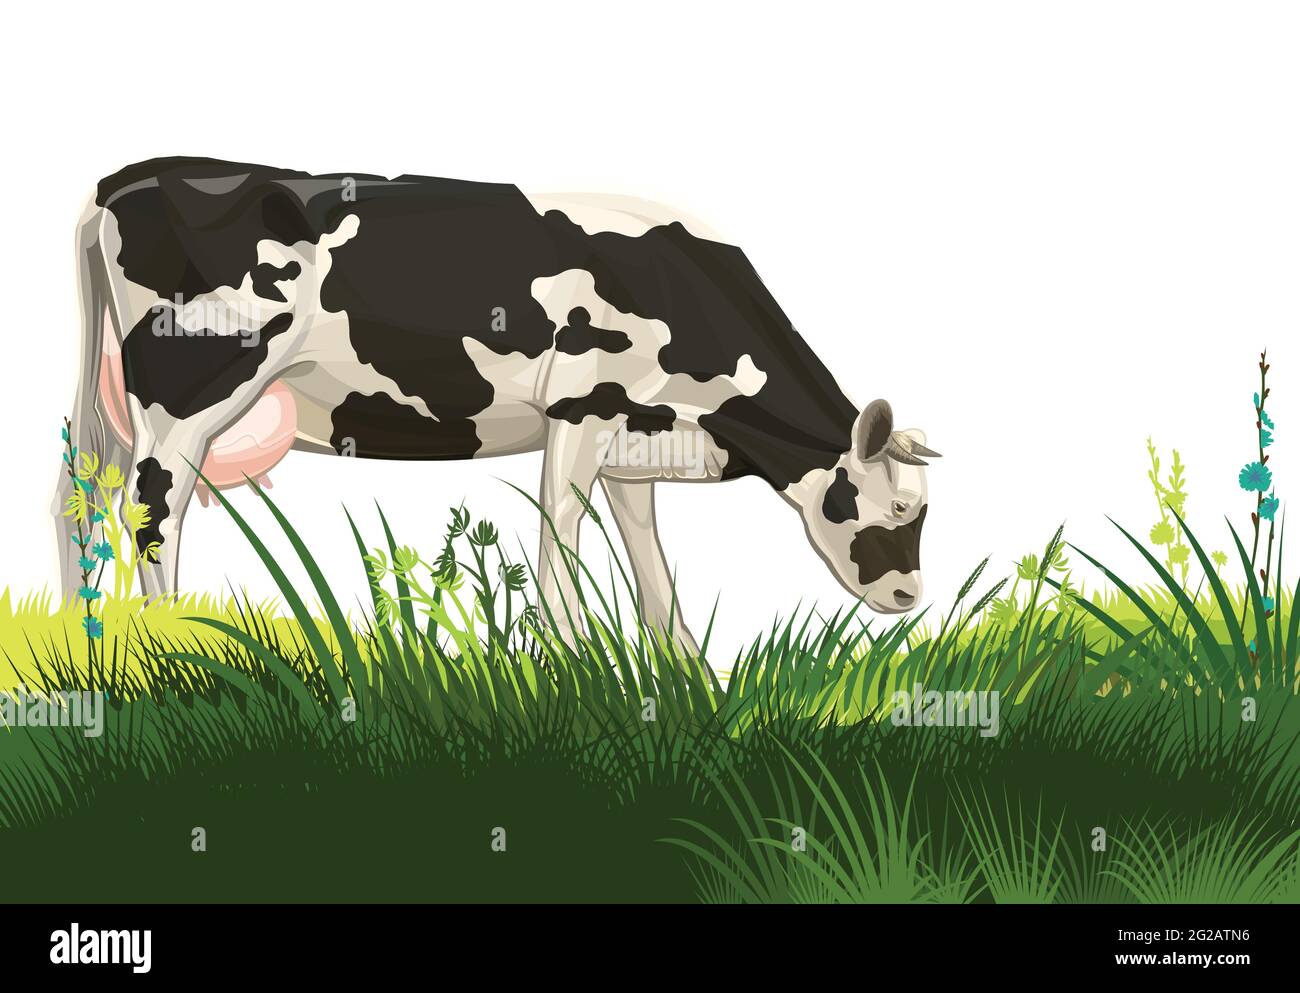 A cow is grazing in a pasture. Isolated landscape on a white background. Black and white breed. Meadow grass. Rural rustic view. Vector Stock Vector